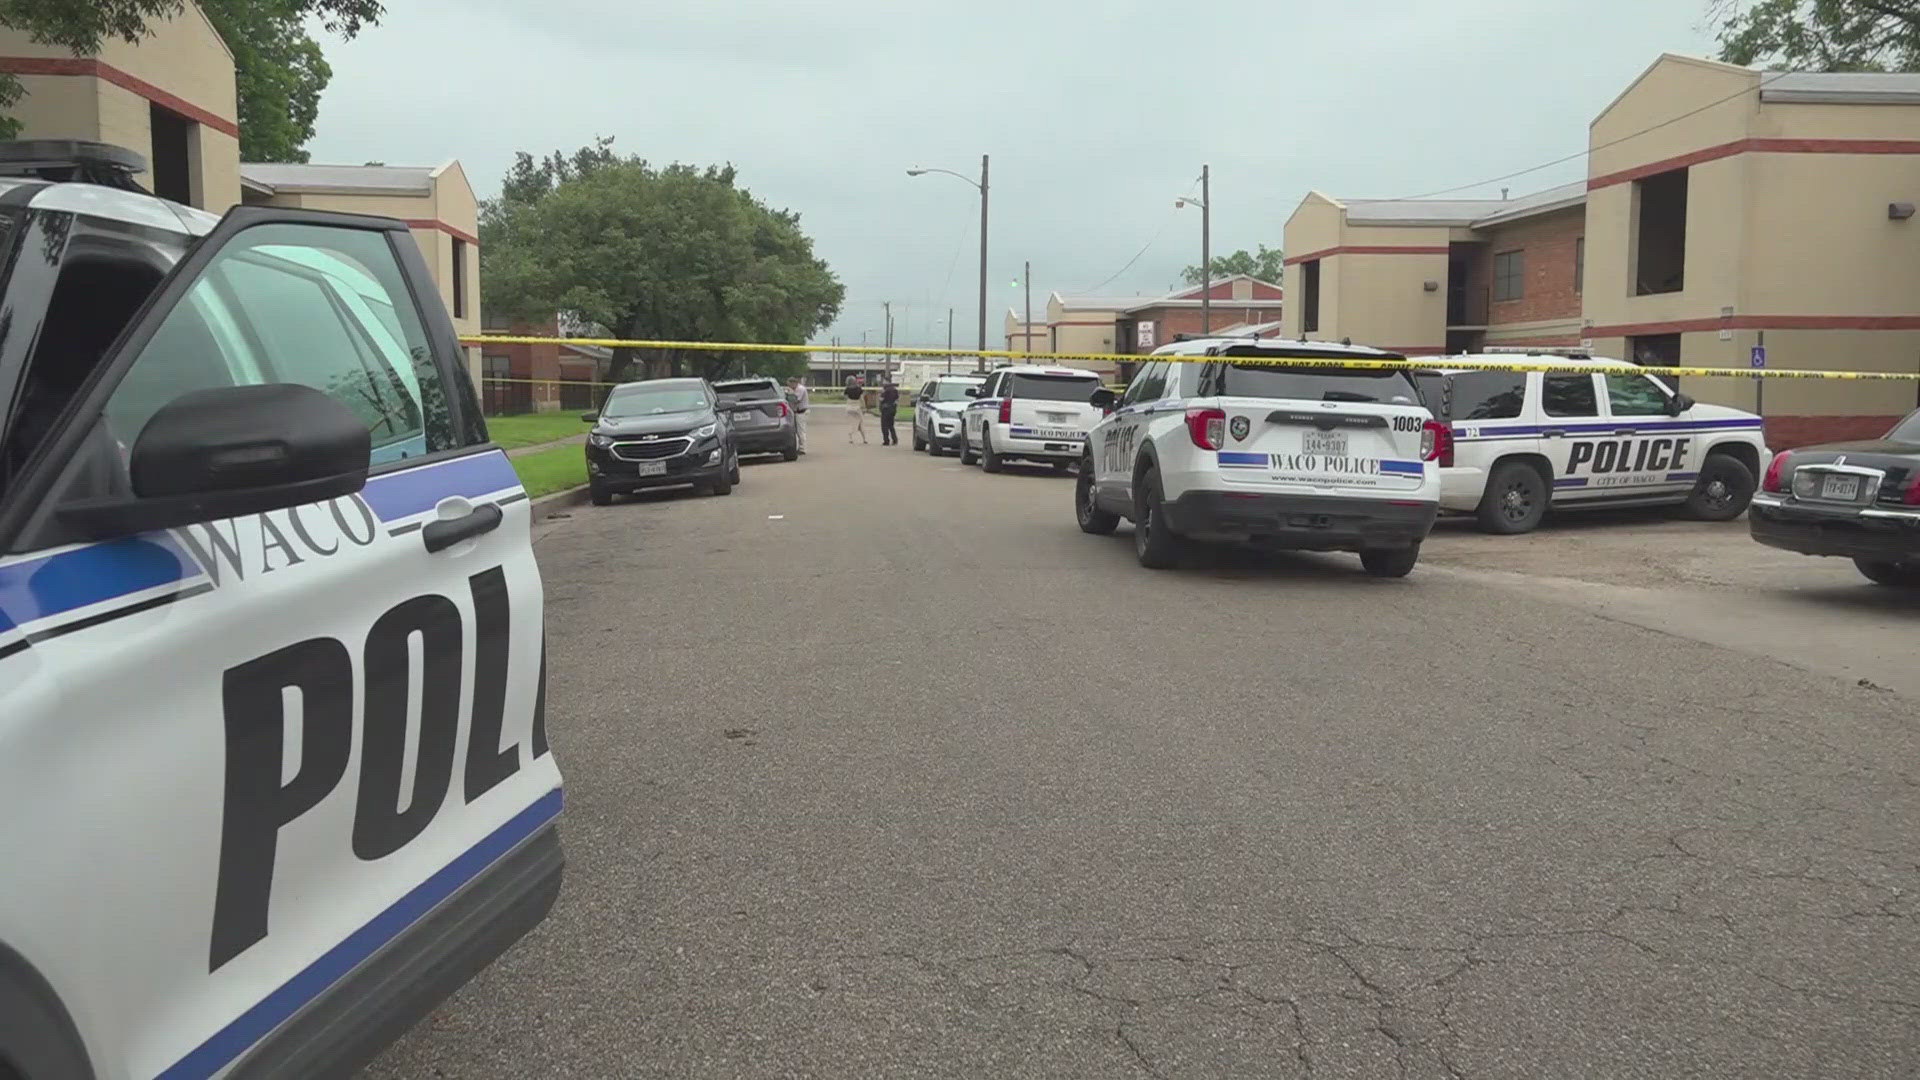 One male is dead and a suspect is on the loose following a shooting that took place in Waco on Monday, May 13, according to Waco Police Department Cierra Shipley.